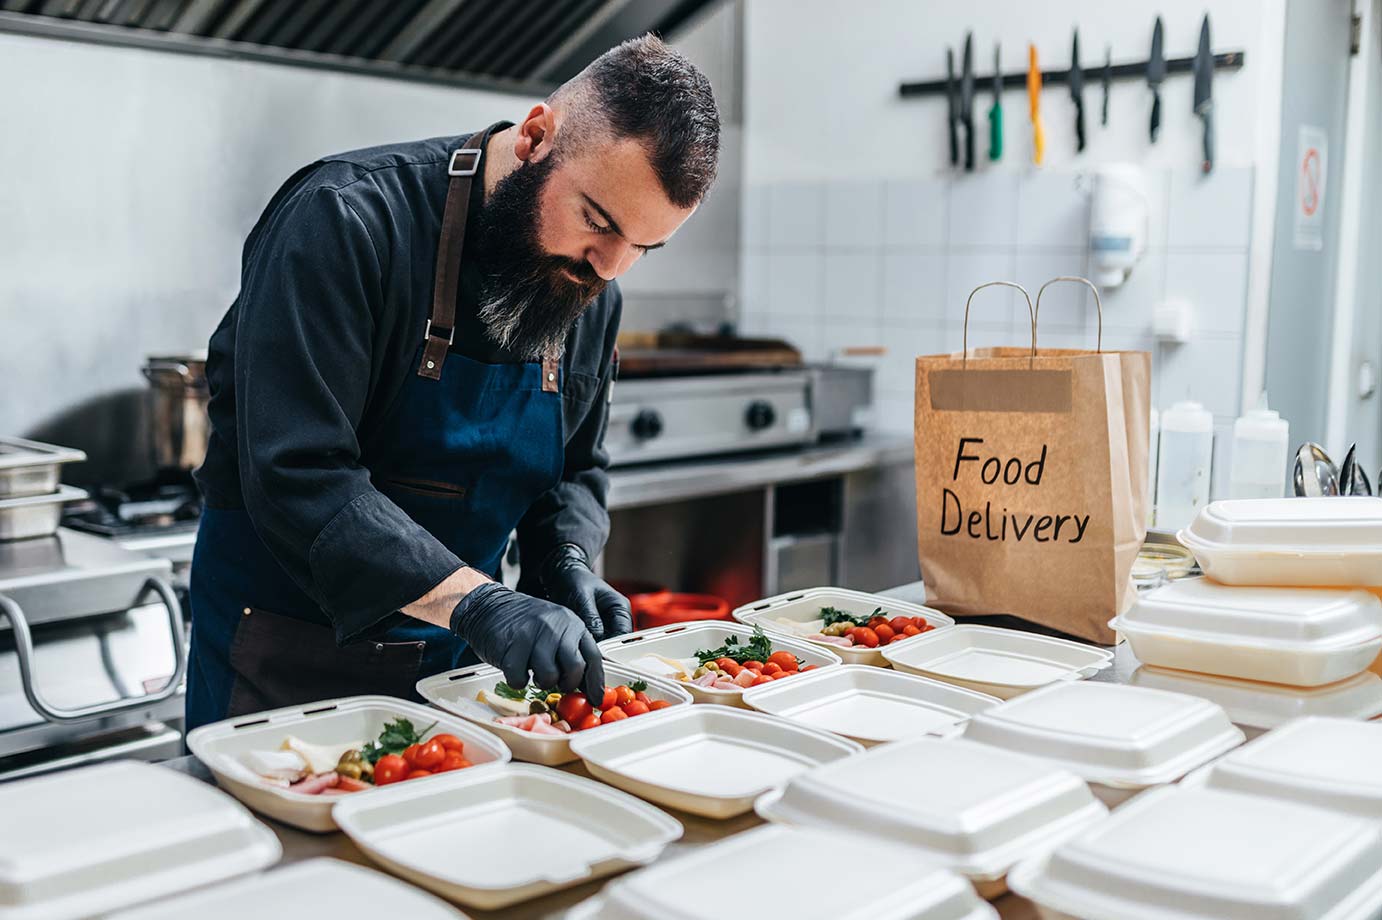 A chef prepares multiple meals for delivery.